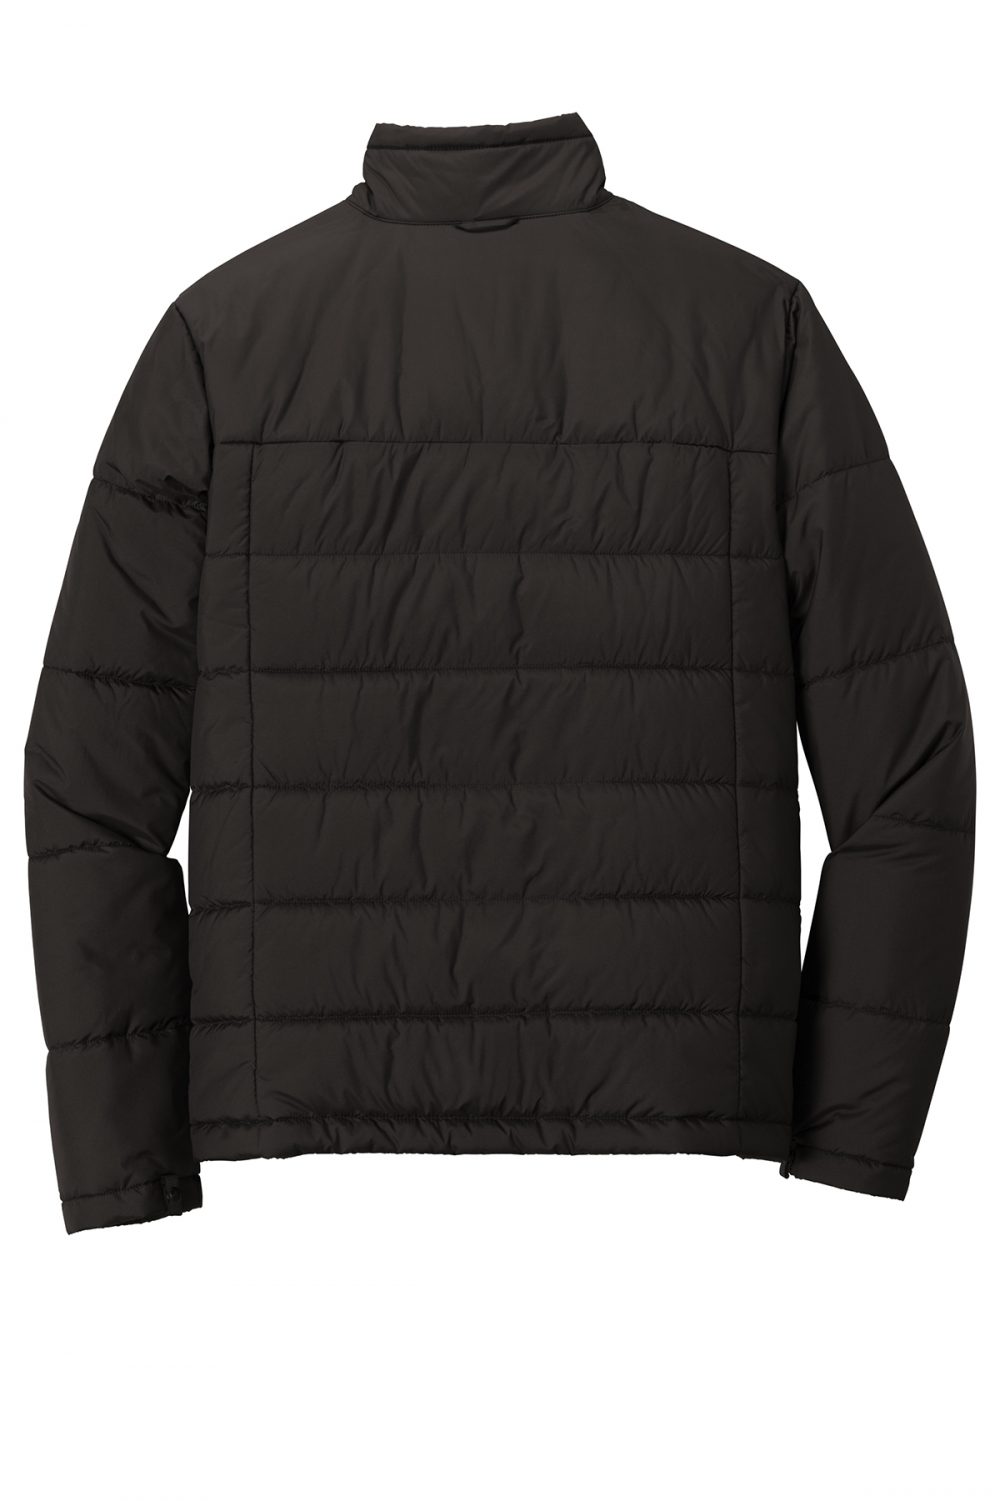 The North Face ® Nf0a3vhr Traverse Triclimate ® 3-in-1 Jacket size M